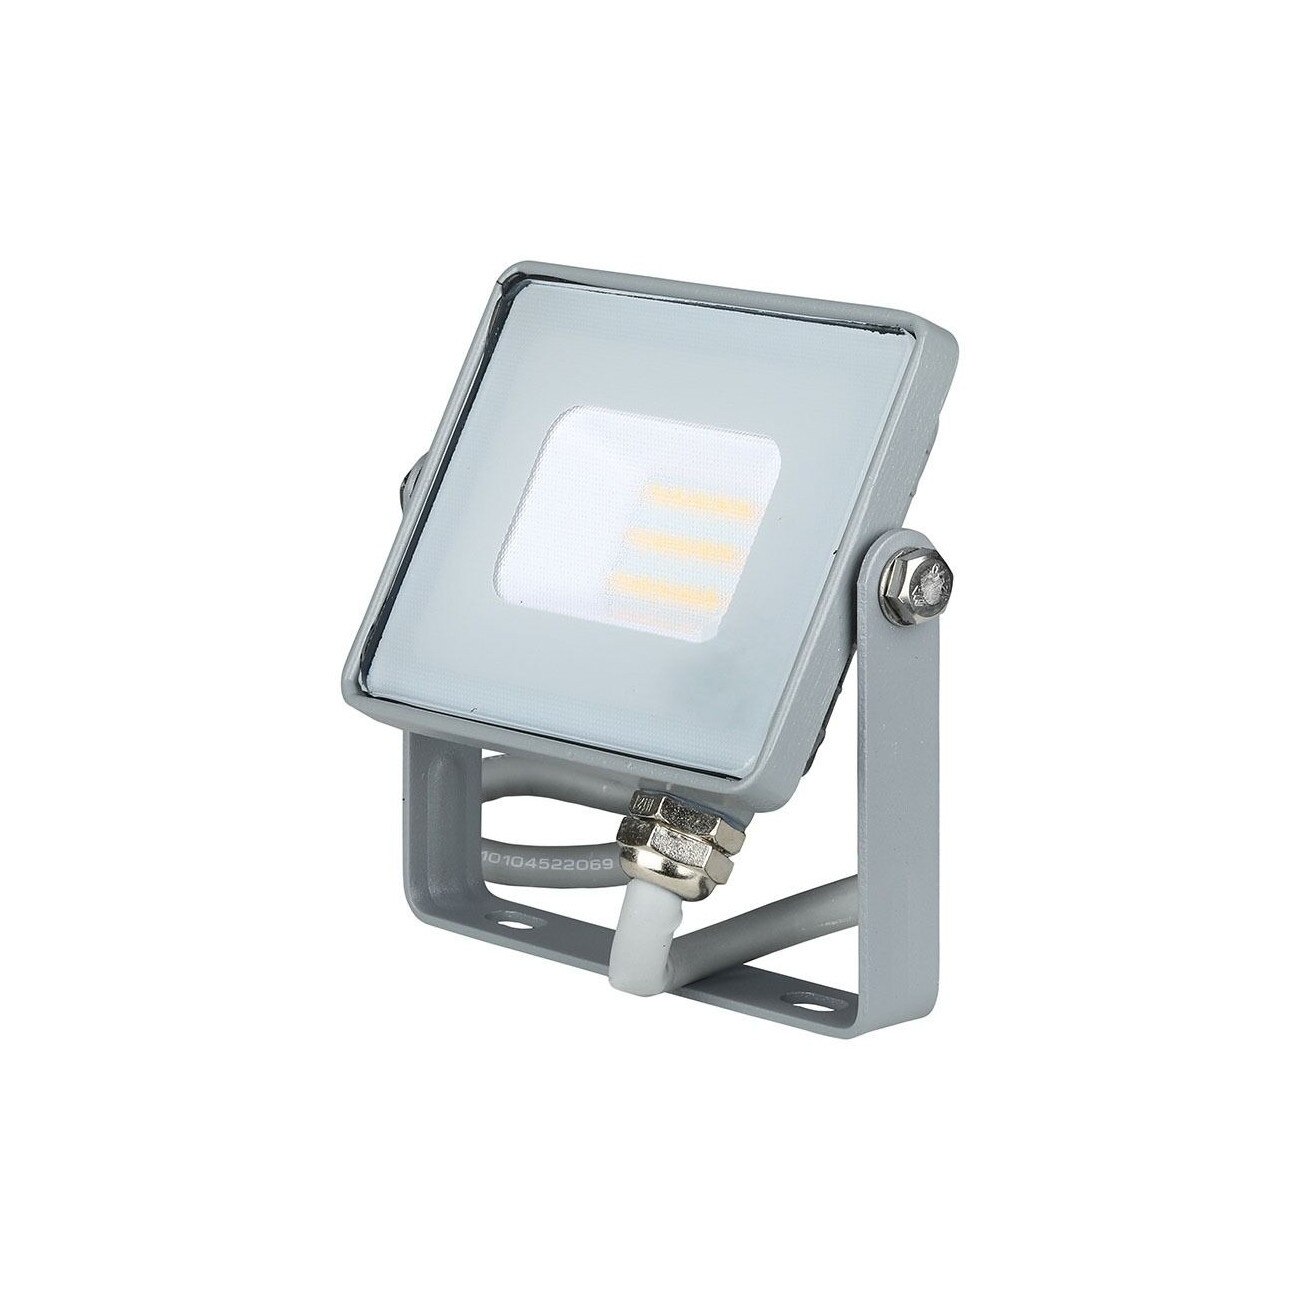 on a holiday lettuce cup Proiector led chip Samsung 10W, 800lm, IP65, lumina rece 6400K, gri, V-TAC,  5 ani garantie - eMAG.ro